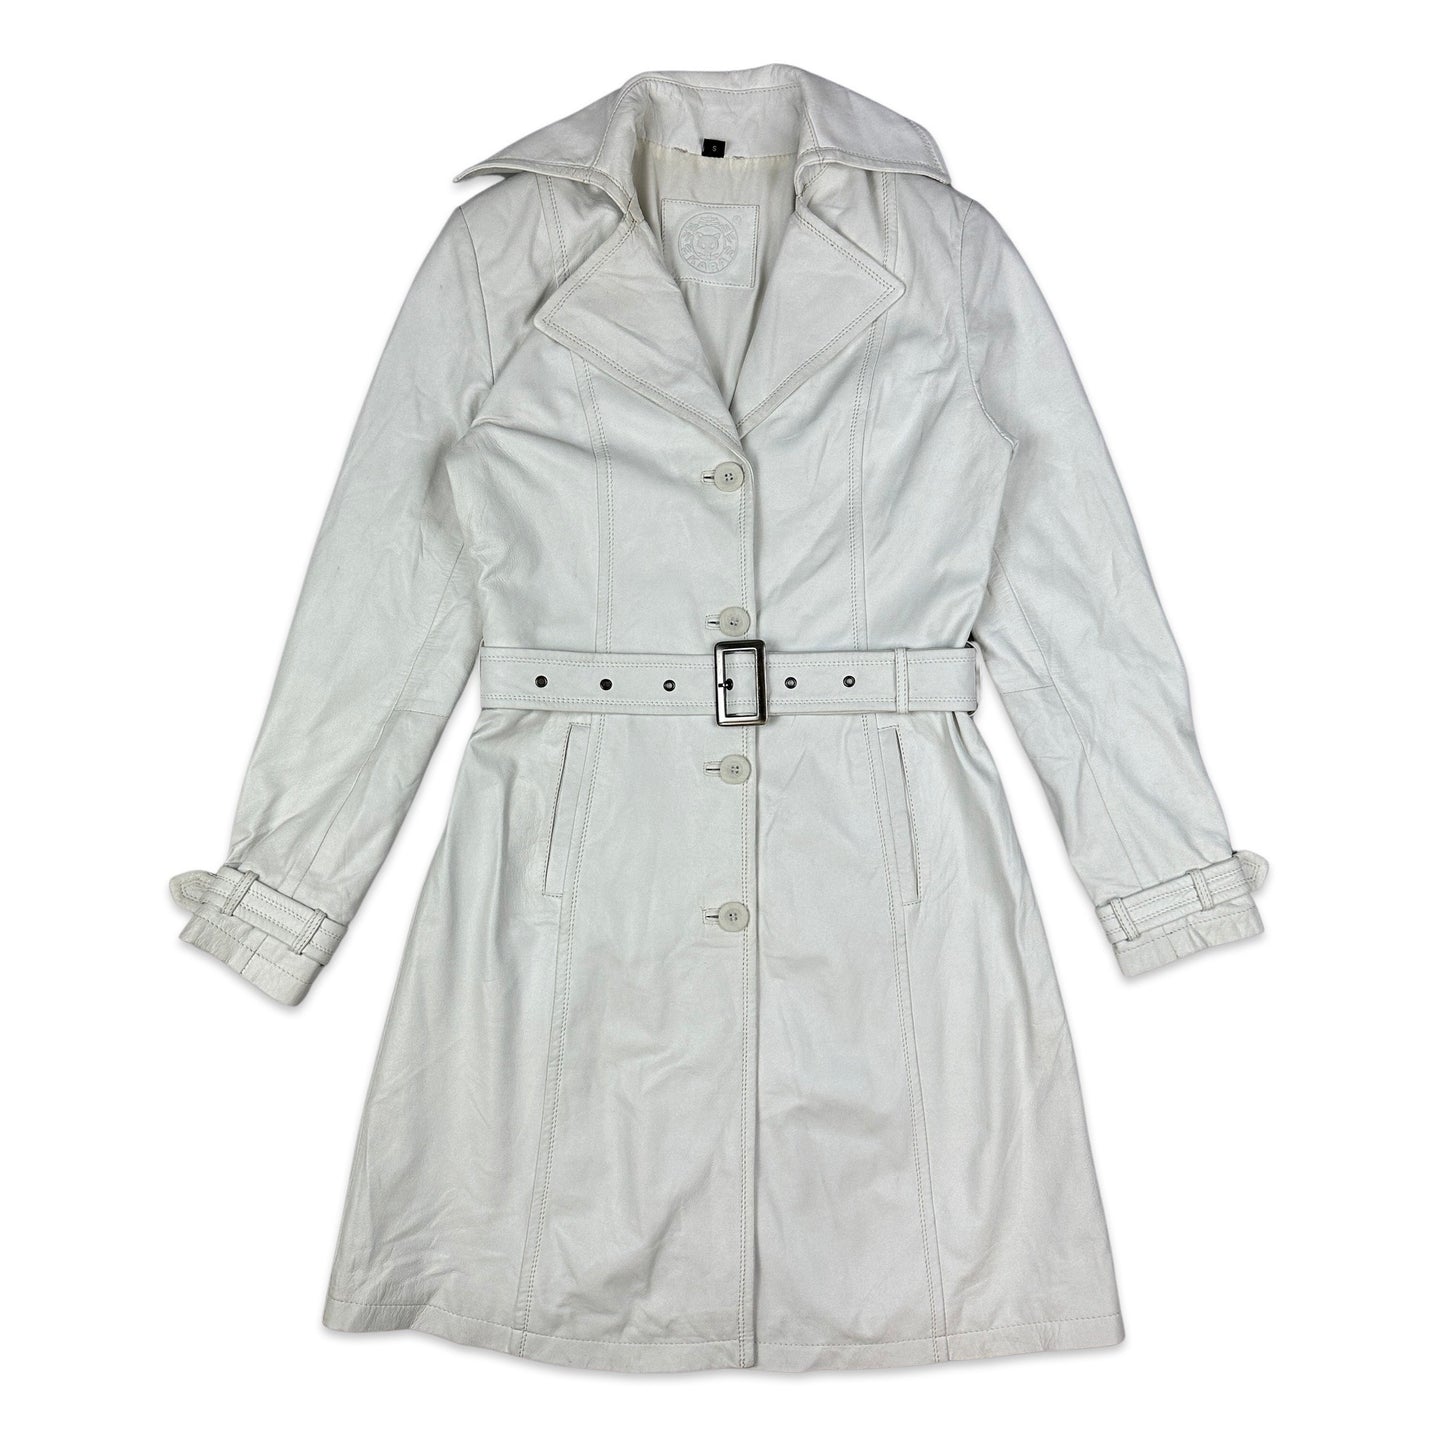 Y2K Vintage White Leather Trench Coat 12